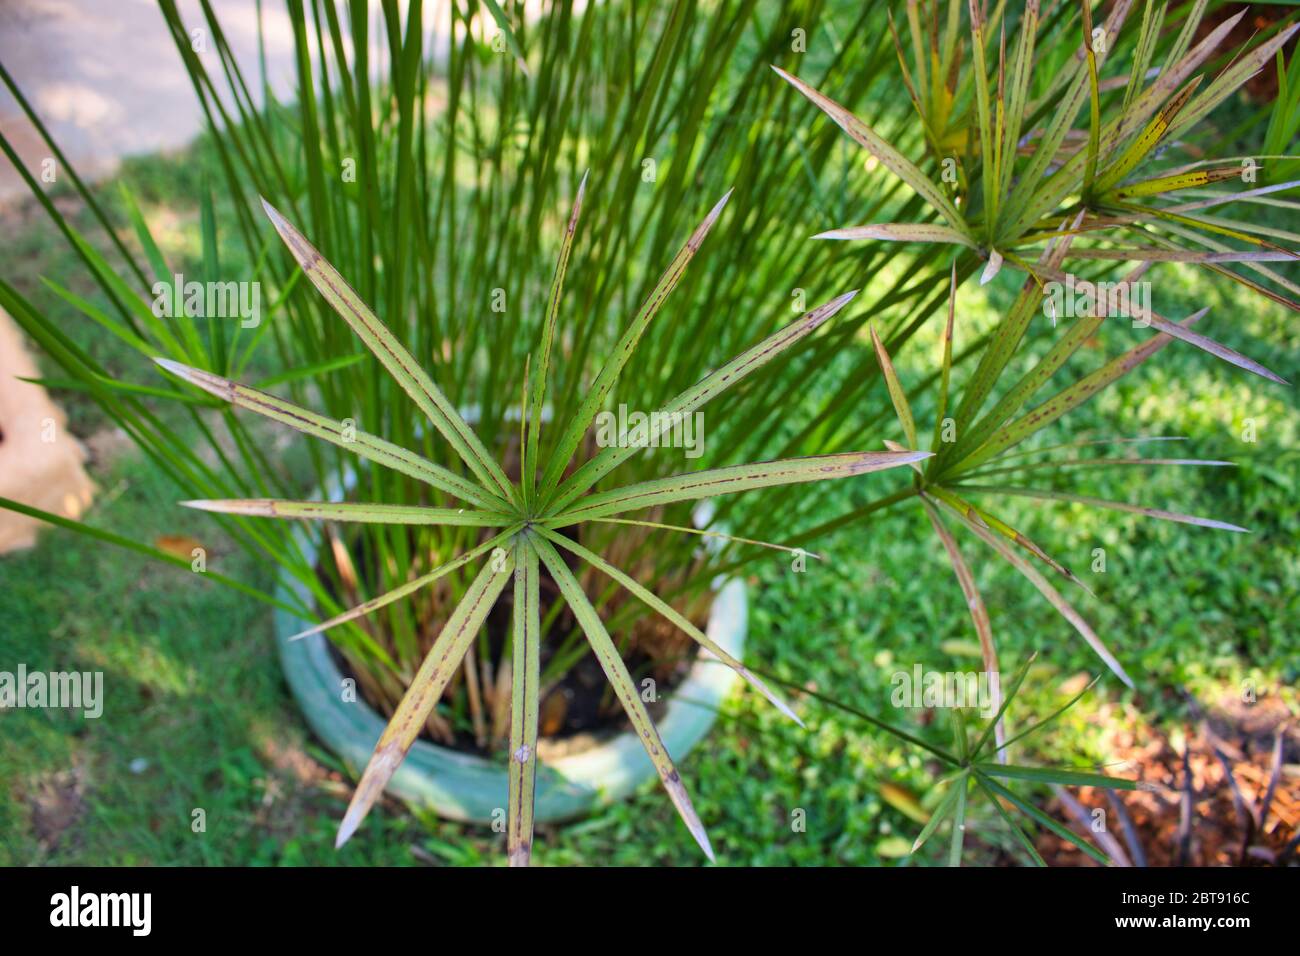 This unique photo shows a small palm tree in a pot in the garden. The leaves are arranged in a star shape Stock Photo